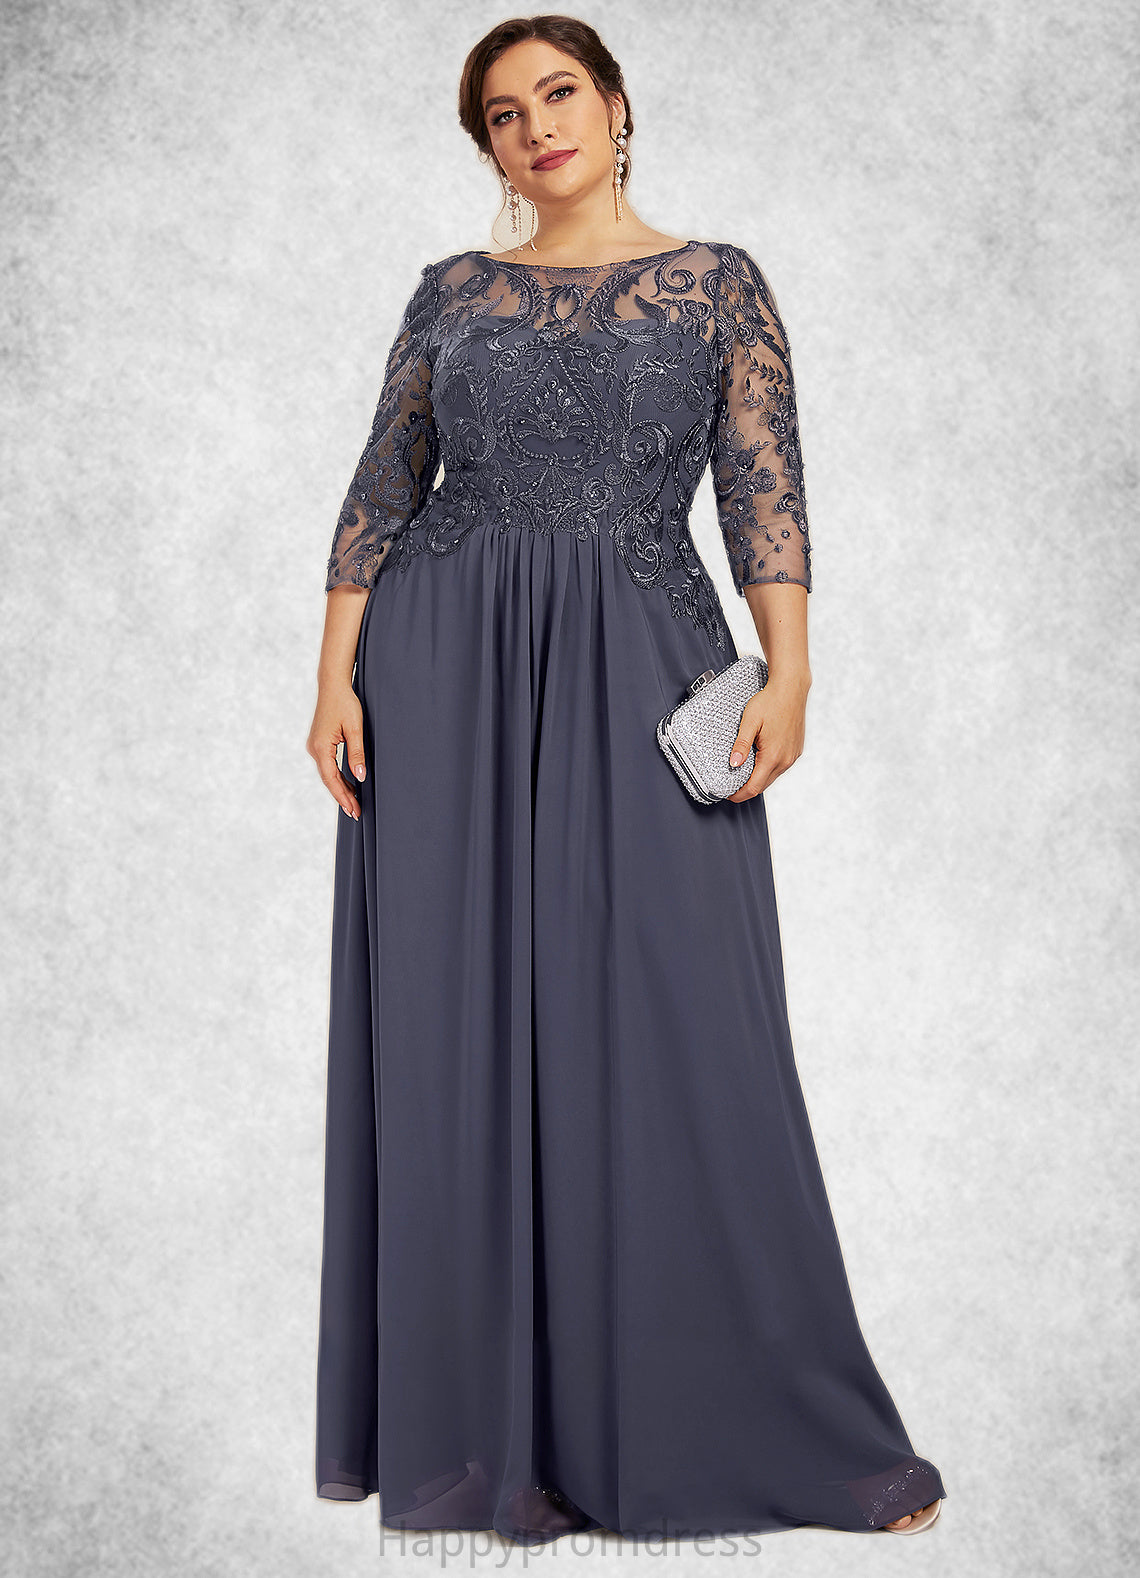 Melanie A-Line Scoop Neck Floor-Length Chiffon Lace Mother of the Bride Dress With Beading Sequins XXS126P0014578